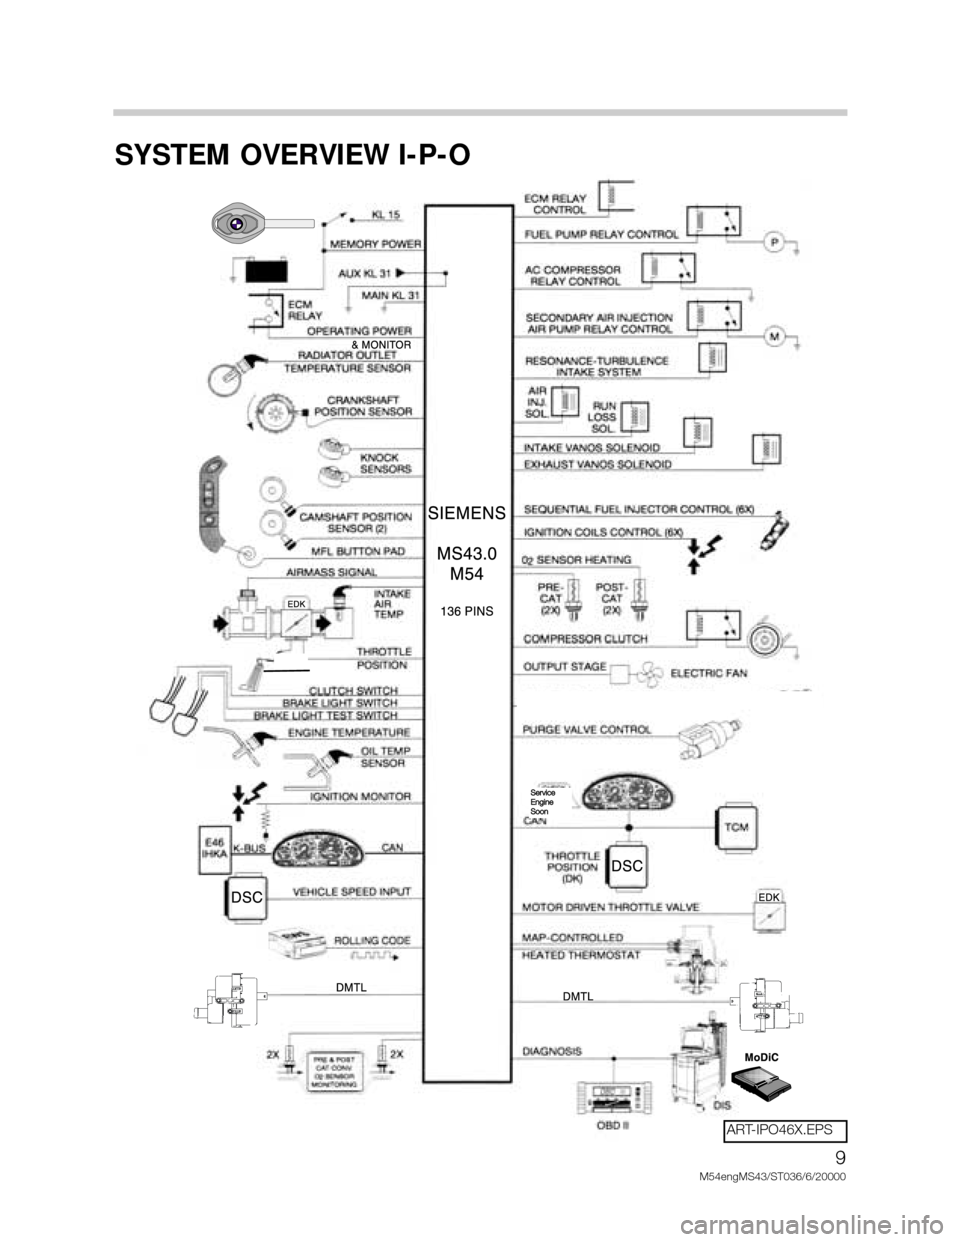 BMW X5 1999 E53 M54 Engine Workshop Manual 9
M54engMS43/ST036/6/20000
SYSTEM OVERVIEW I-P-O
Service 
Engine
Soon
ART-IPO46X.EPS 